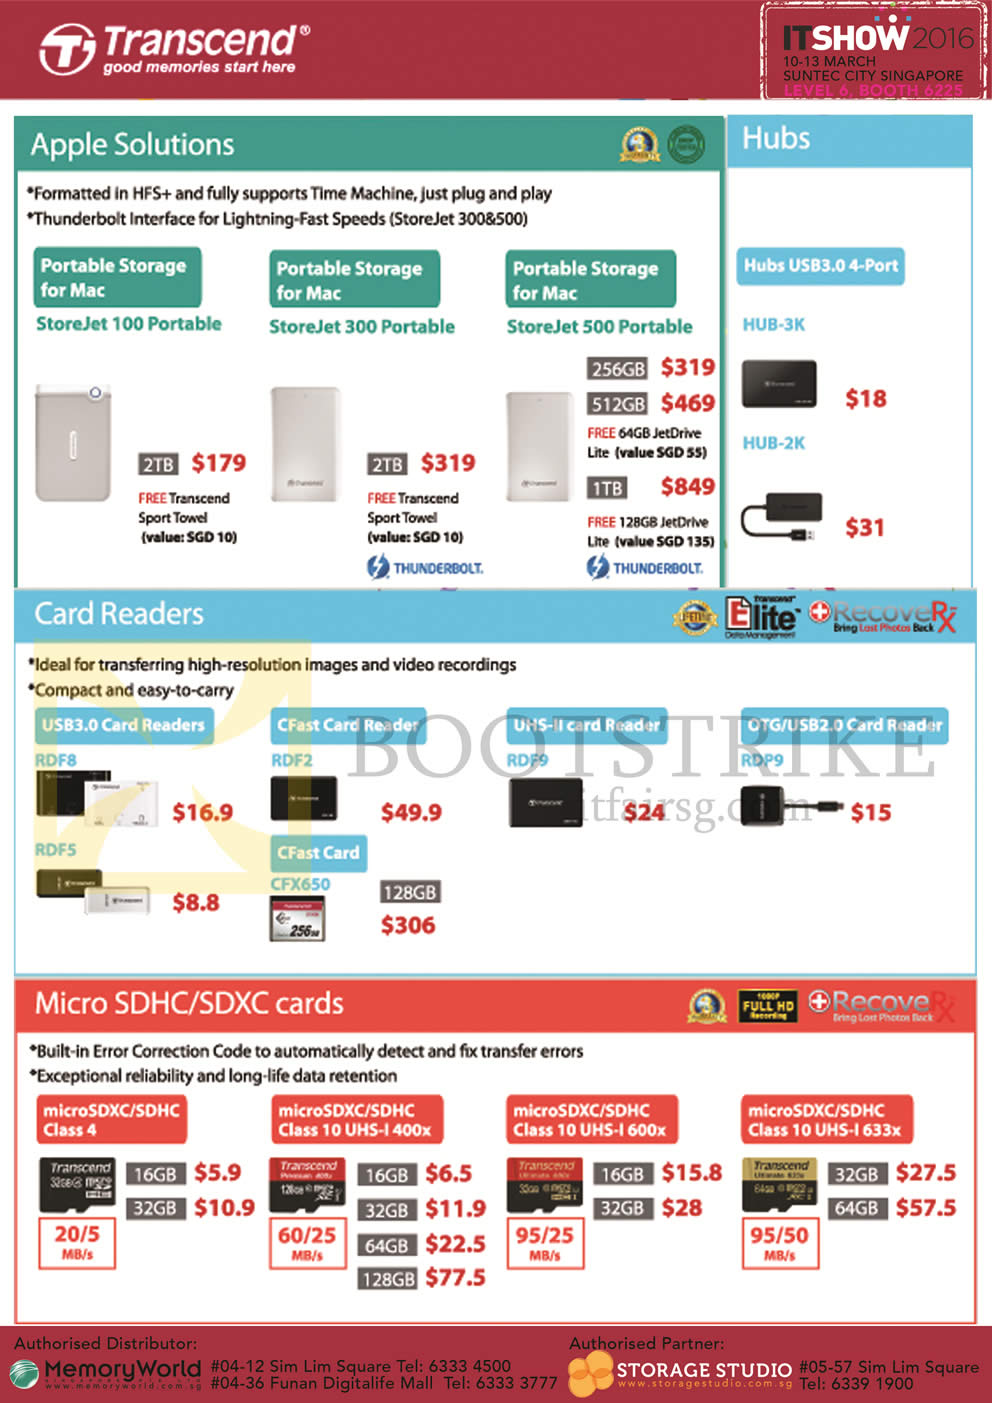 IT SHOW 2016 price list image brochure of Memory World Transcend Apple Solutions, Hubs, Card Readers, Micro SDHC, SDXC Cards